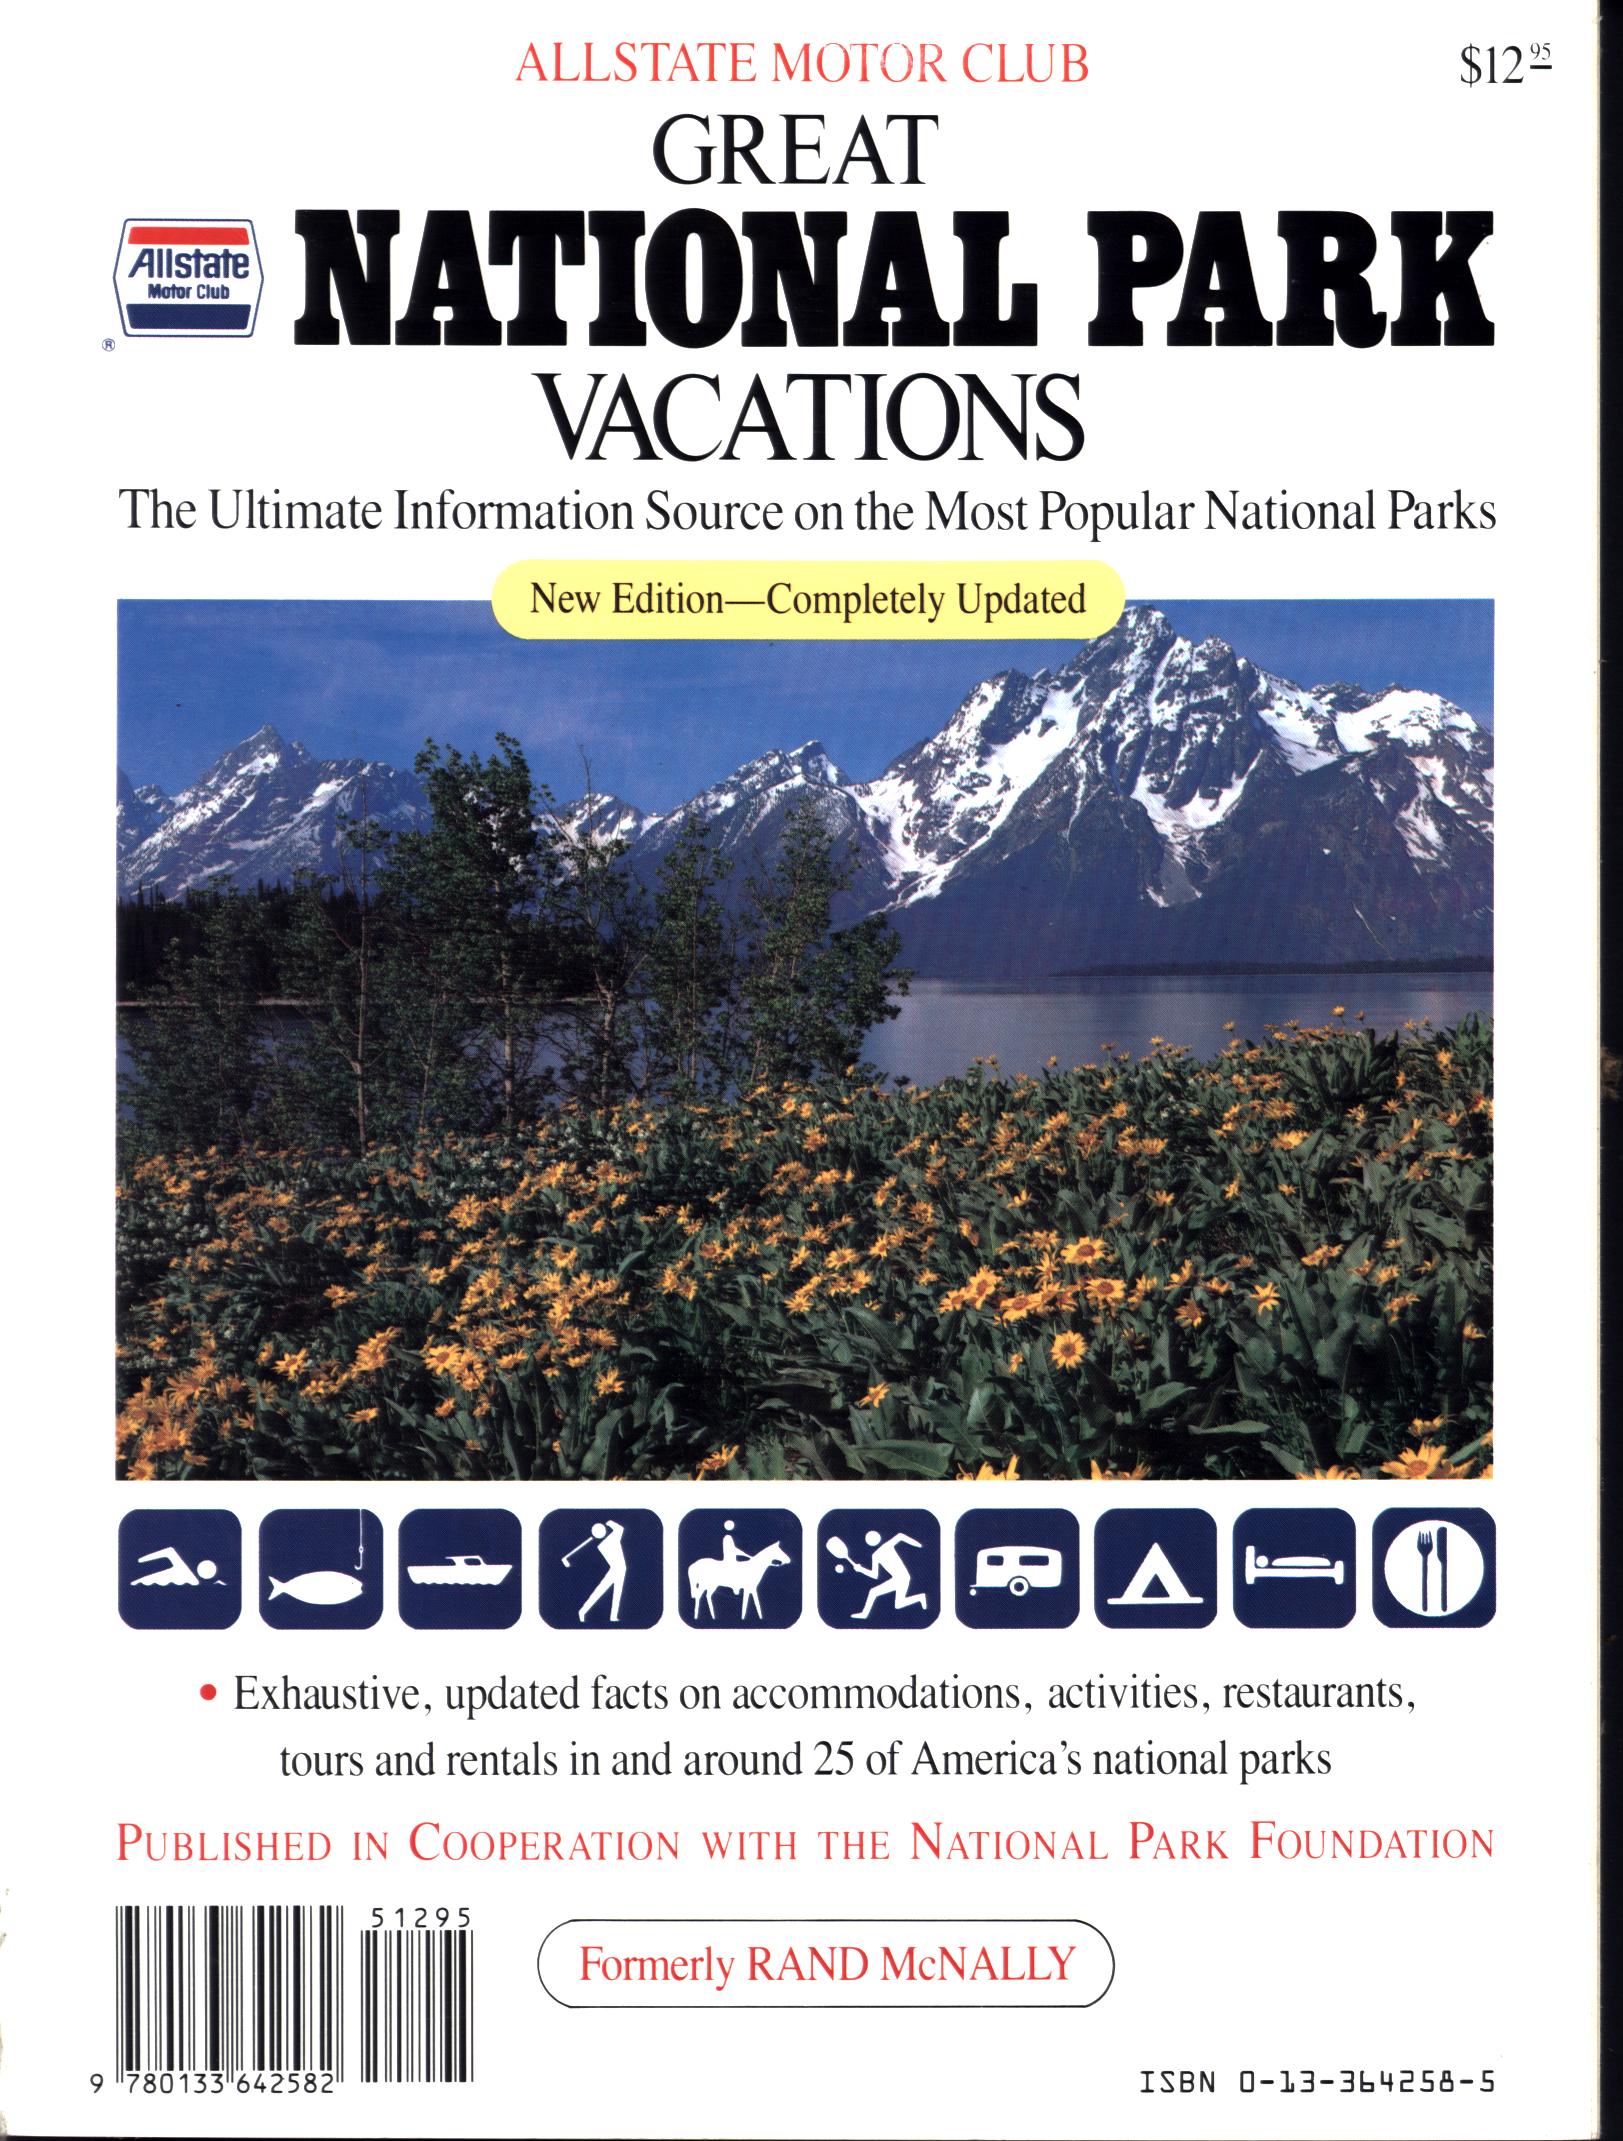 GREAT NATIONAL PARK VACATIONS: the ultimate information source on the most popular national parks. 